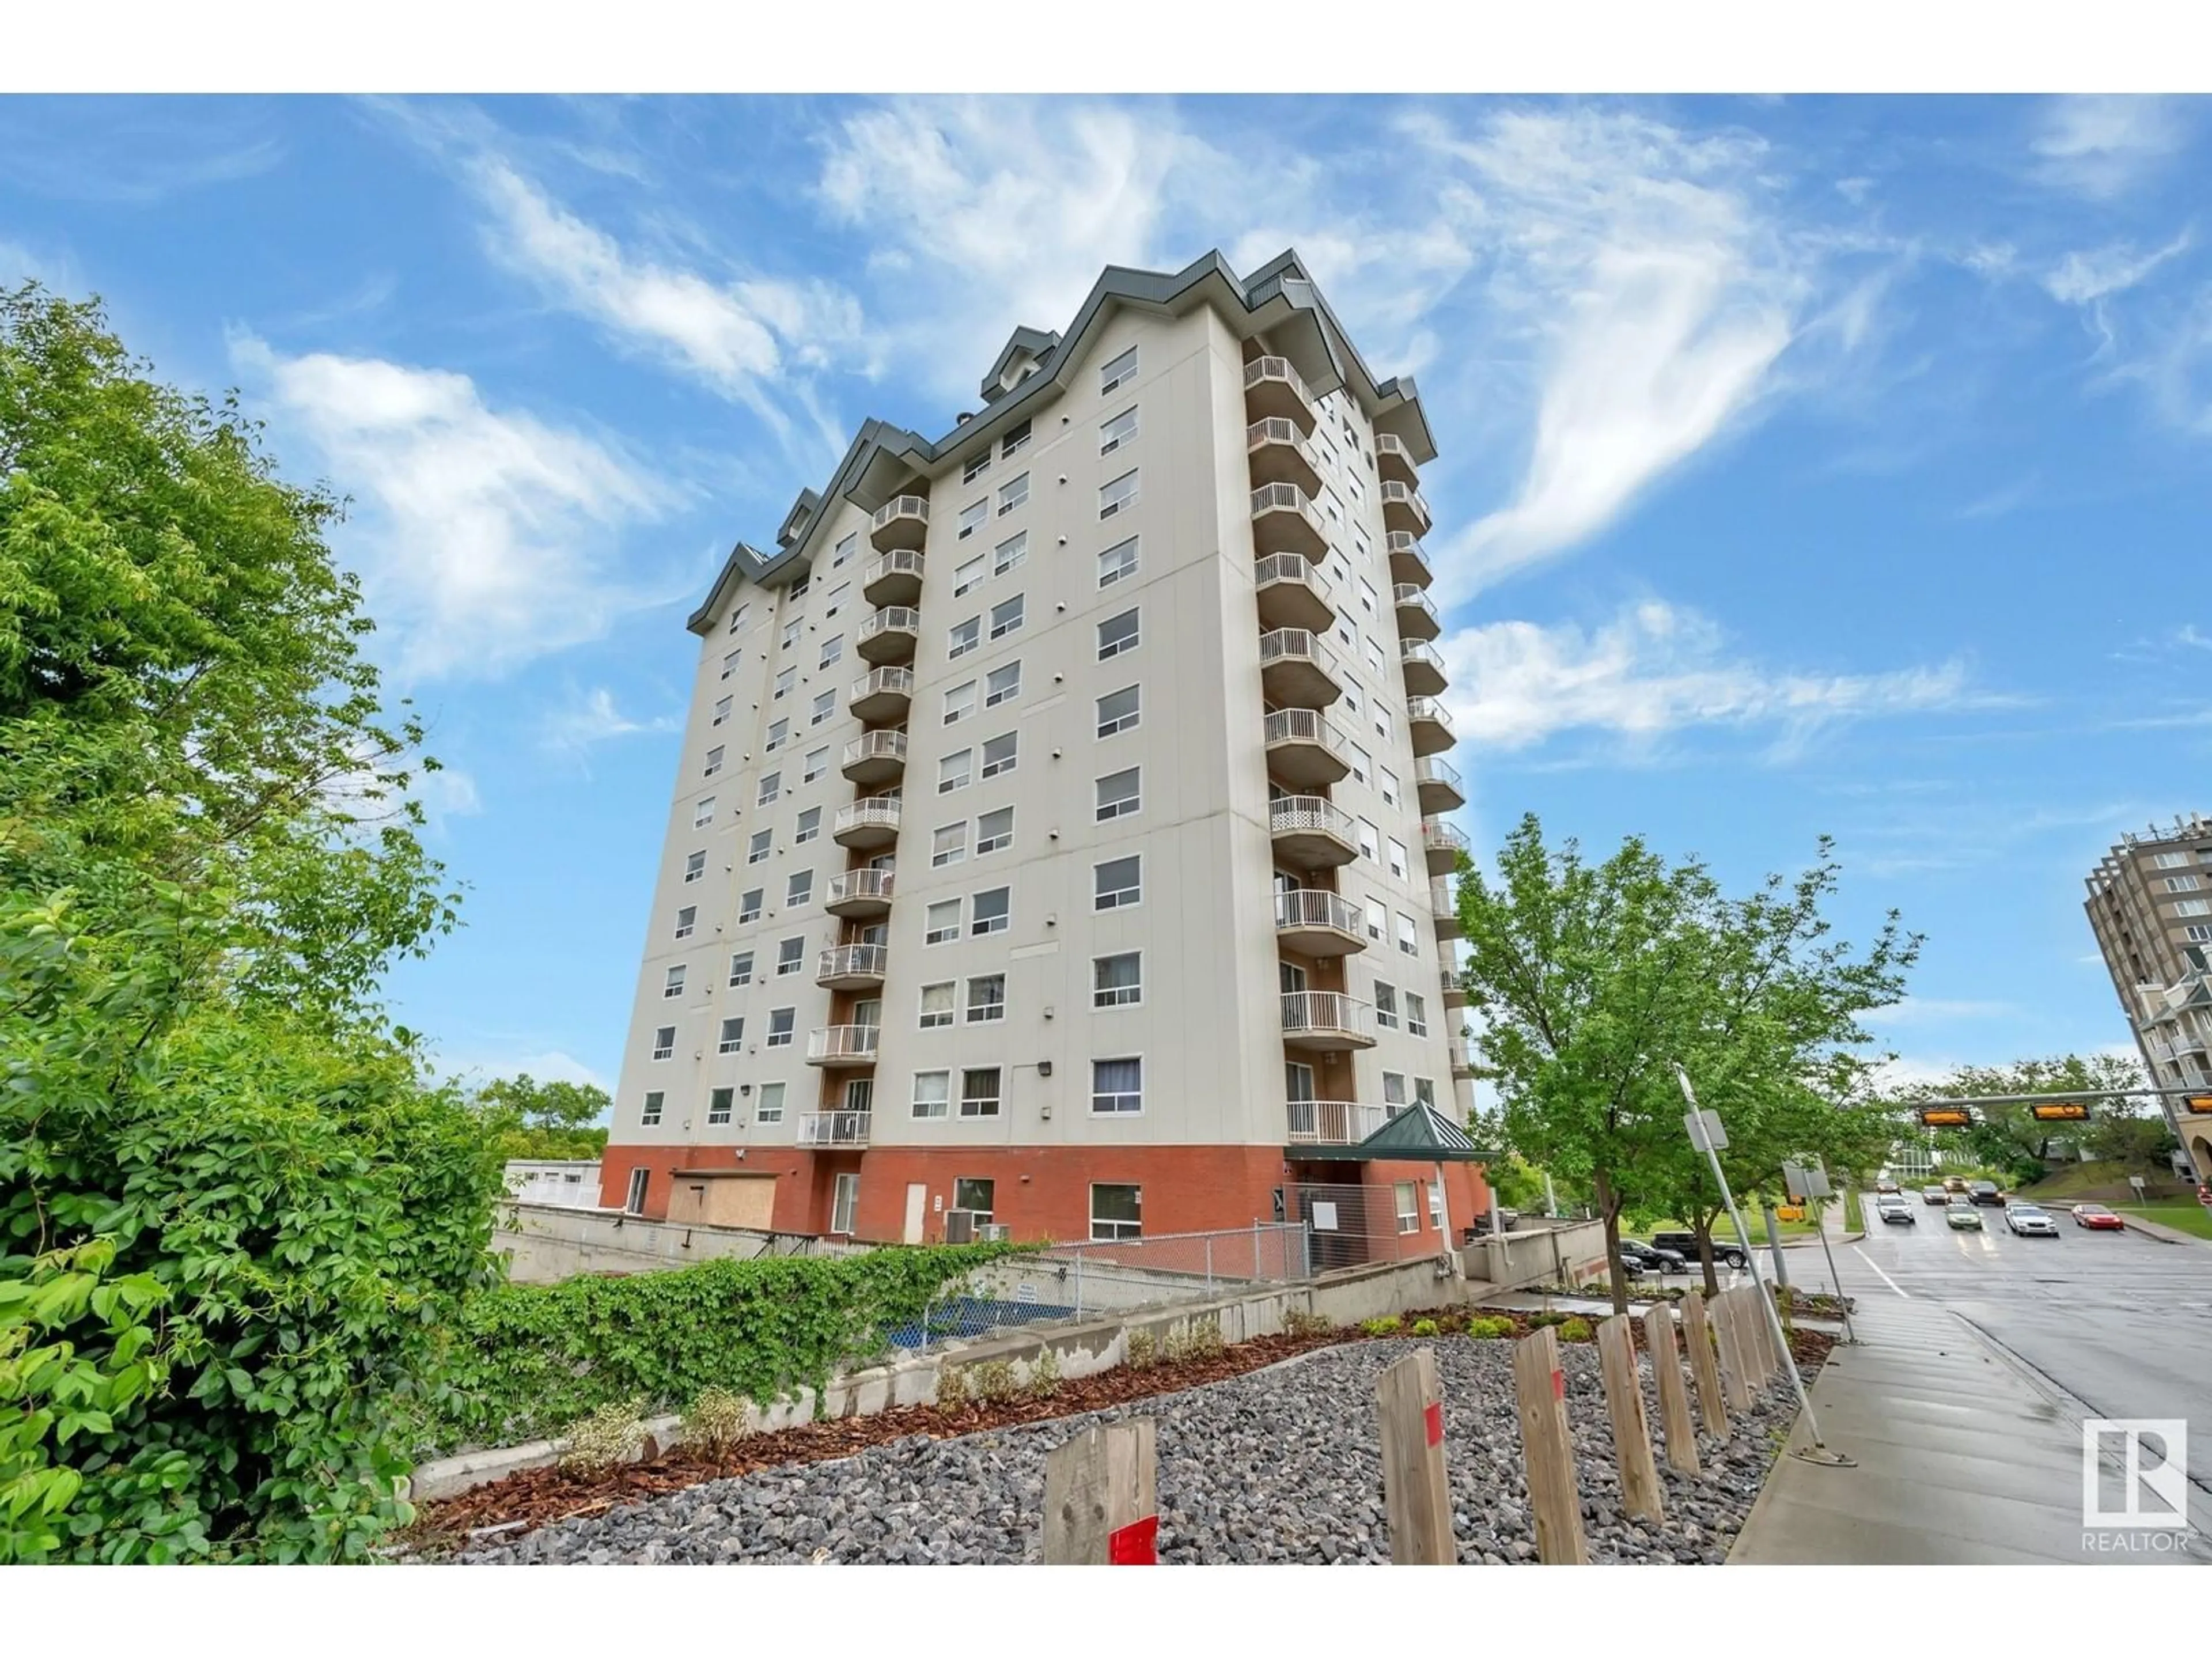 A pic from exterior of the house or condo for #505 9707 105 ST NW, Edmonton Alberta T5K2Y4